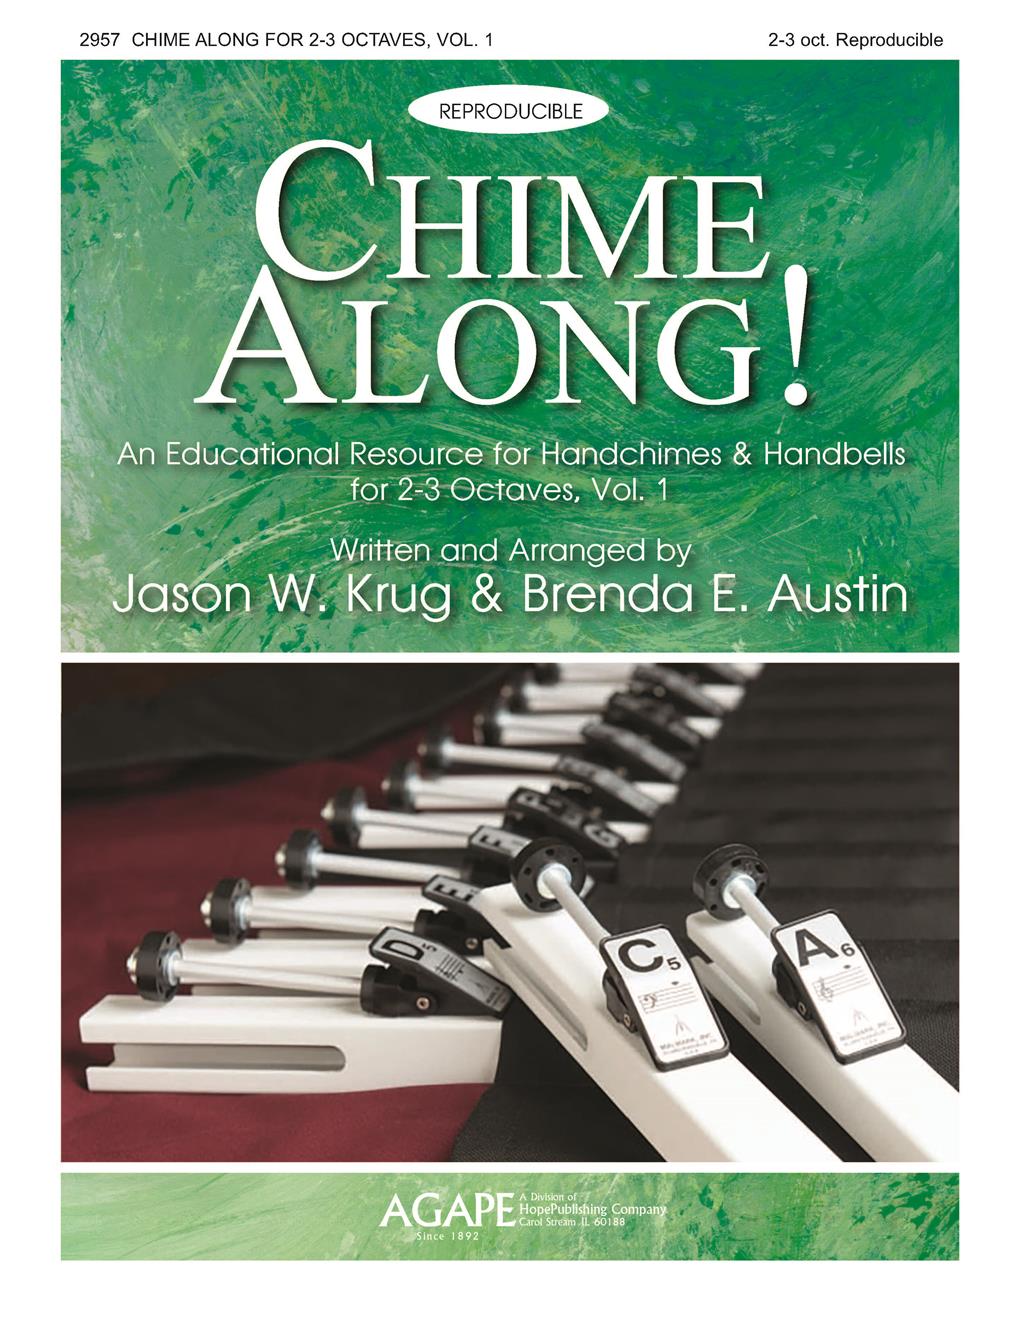 Chime Along An Educational Resource Vol. 1 (Reproducible) Cover Image